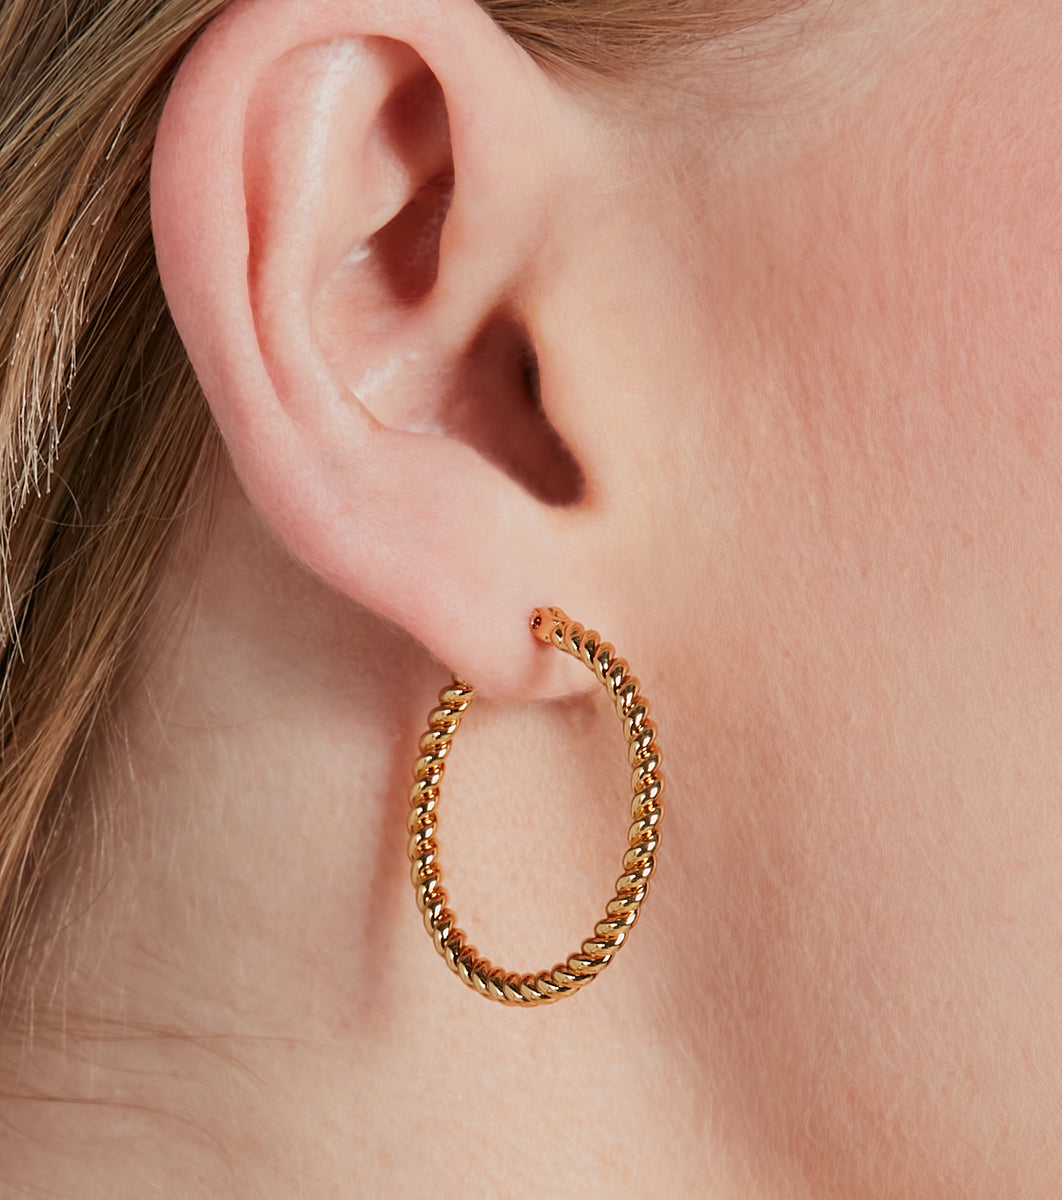 Unique Chic 14K Gold Plated Hoop Earrings